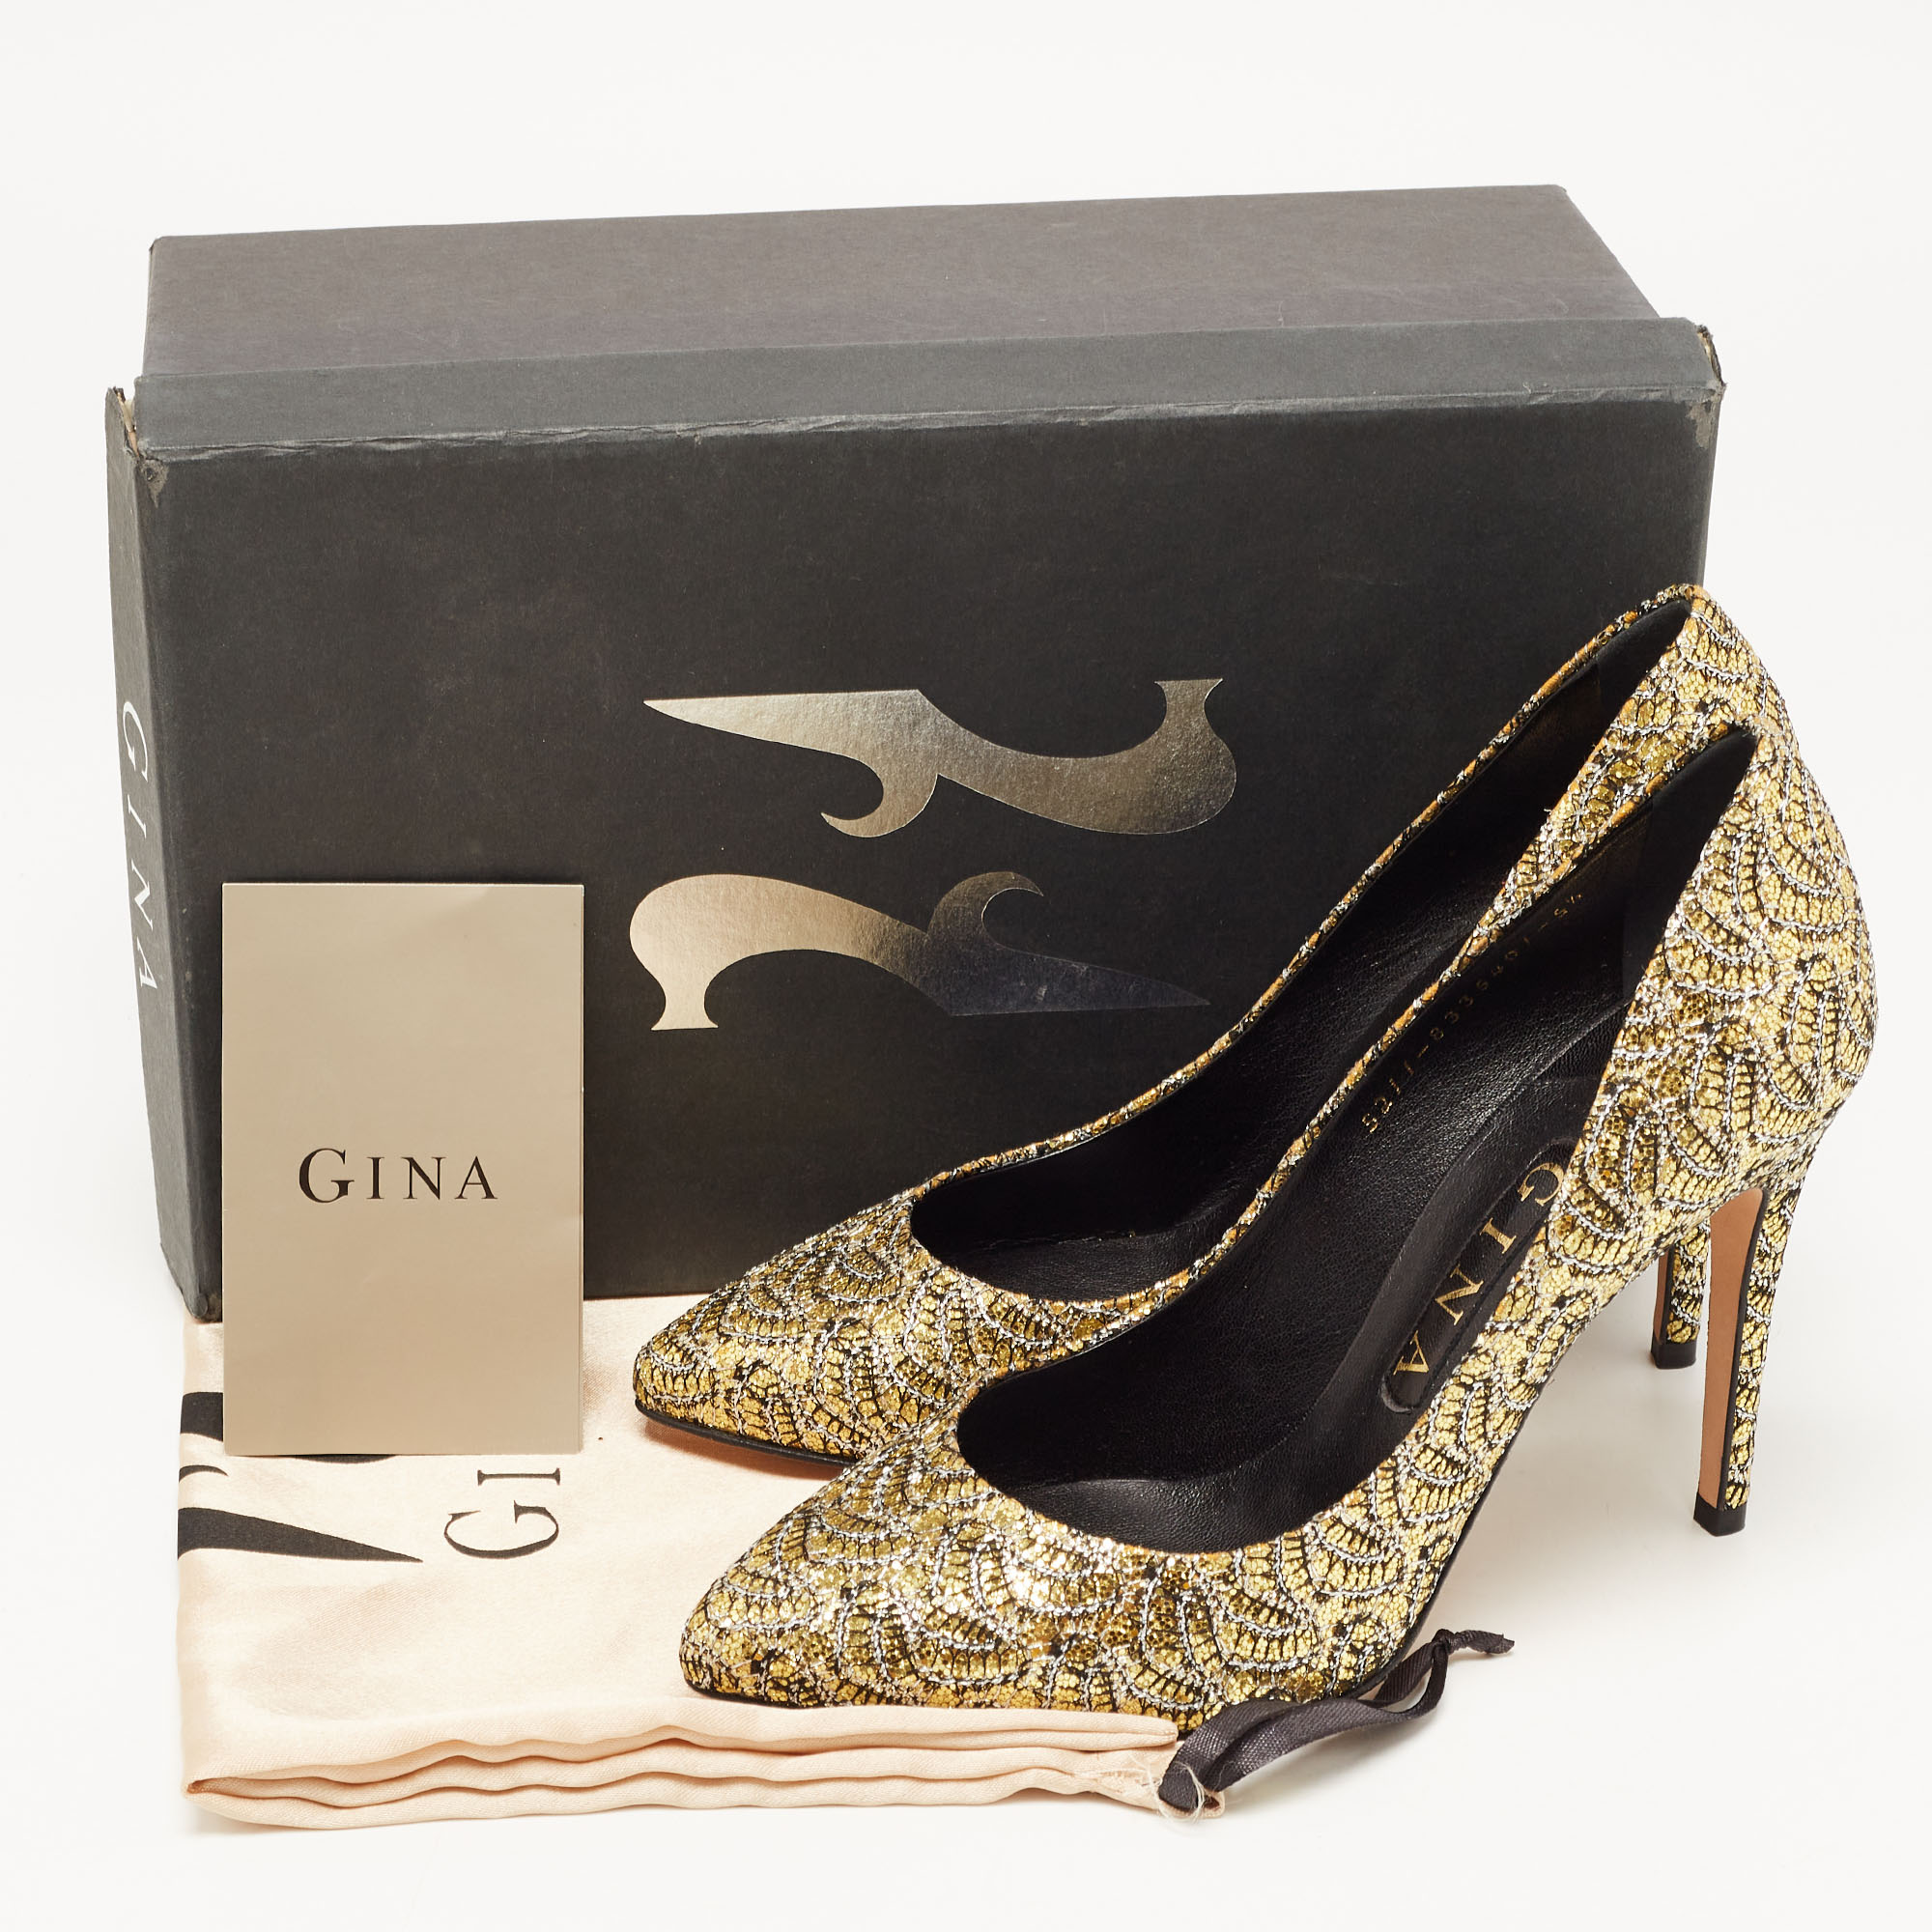 Gina Metallic Gold/Silver Glitter Lace Pointed Toe Pumps Size 38.5